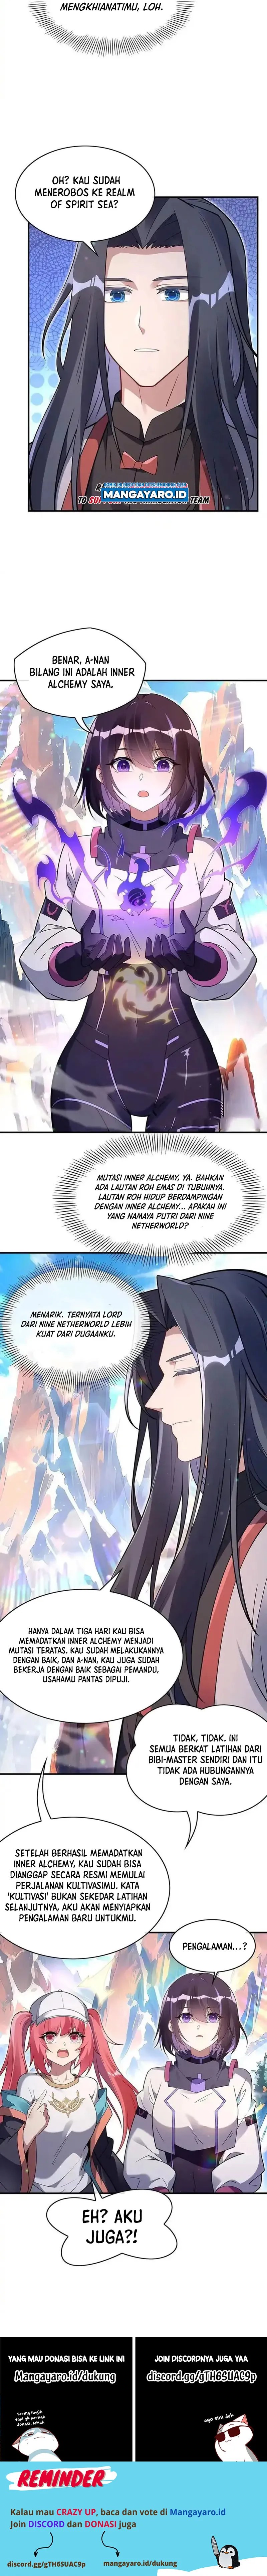 Dilarang COPAS - situs resmi www.mangacanblog.com - Komik my female apprentices are all big shots from the future 270 - chapter 270 271 Indonesia my female apprentices are all big shots from the future 270 - chapter 270 Terbaru 8|Baca Manga Komik Indonesia|Mangacan